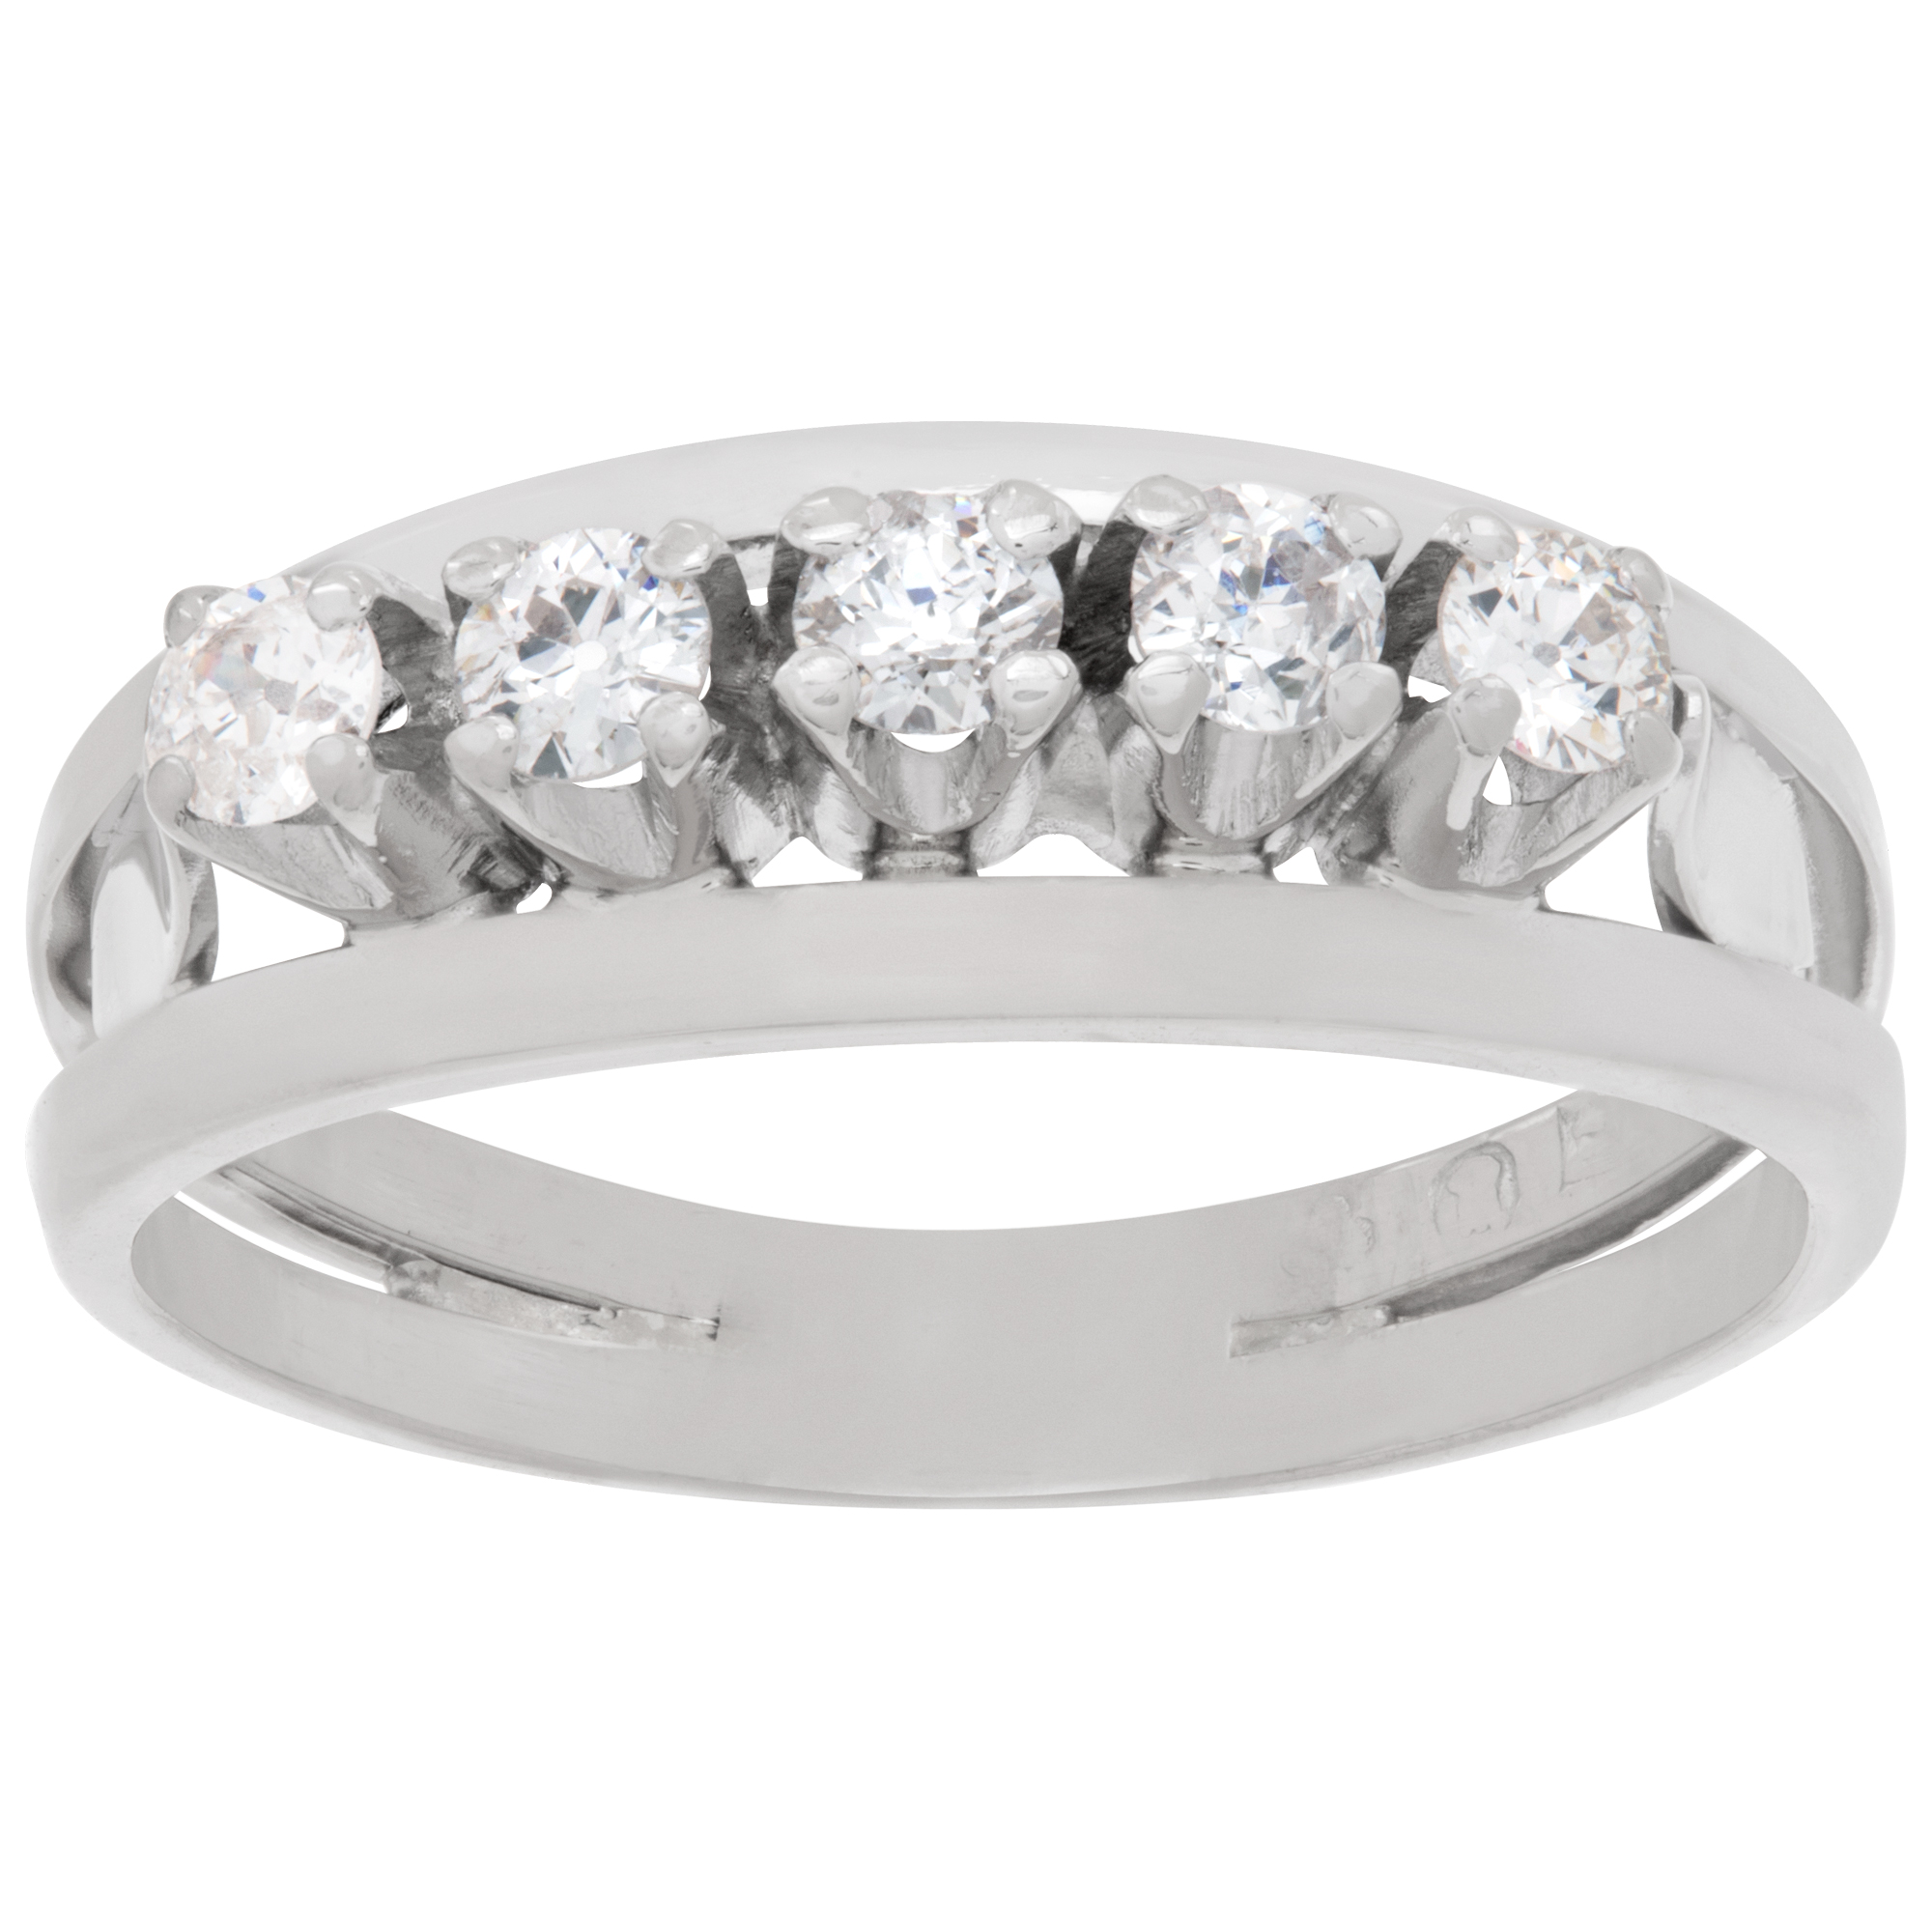 Diamond band with 5 diamonds in 18k white gold. Size 7 image 1